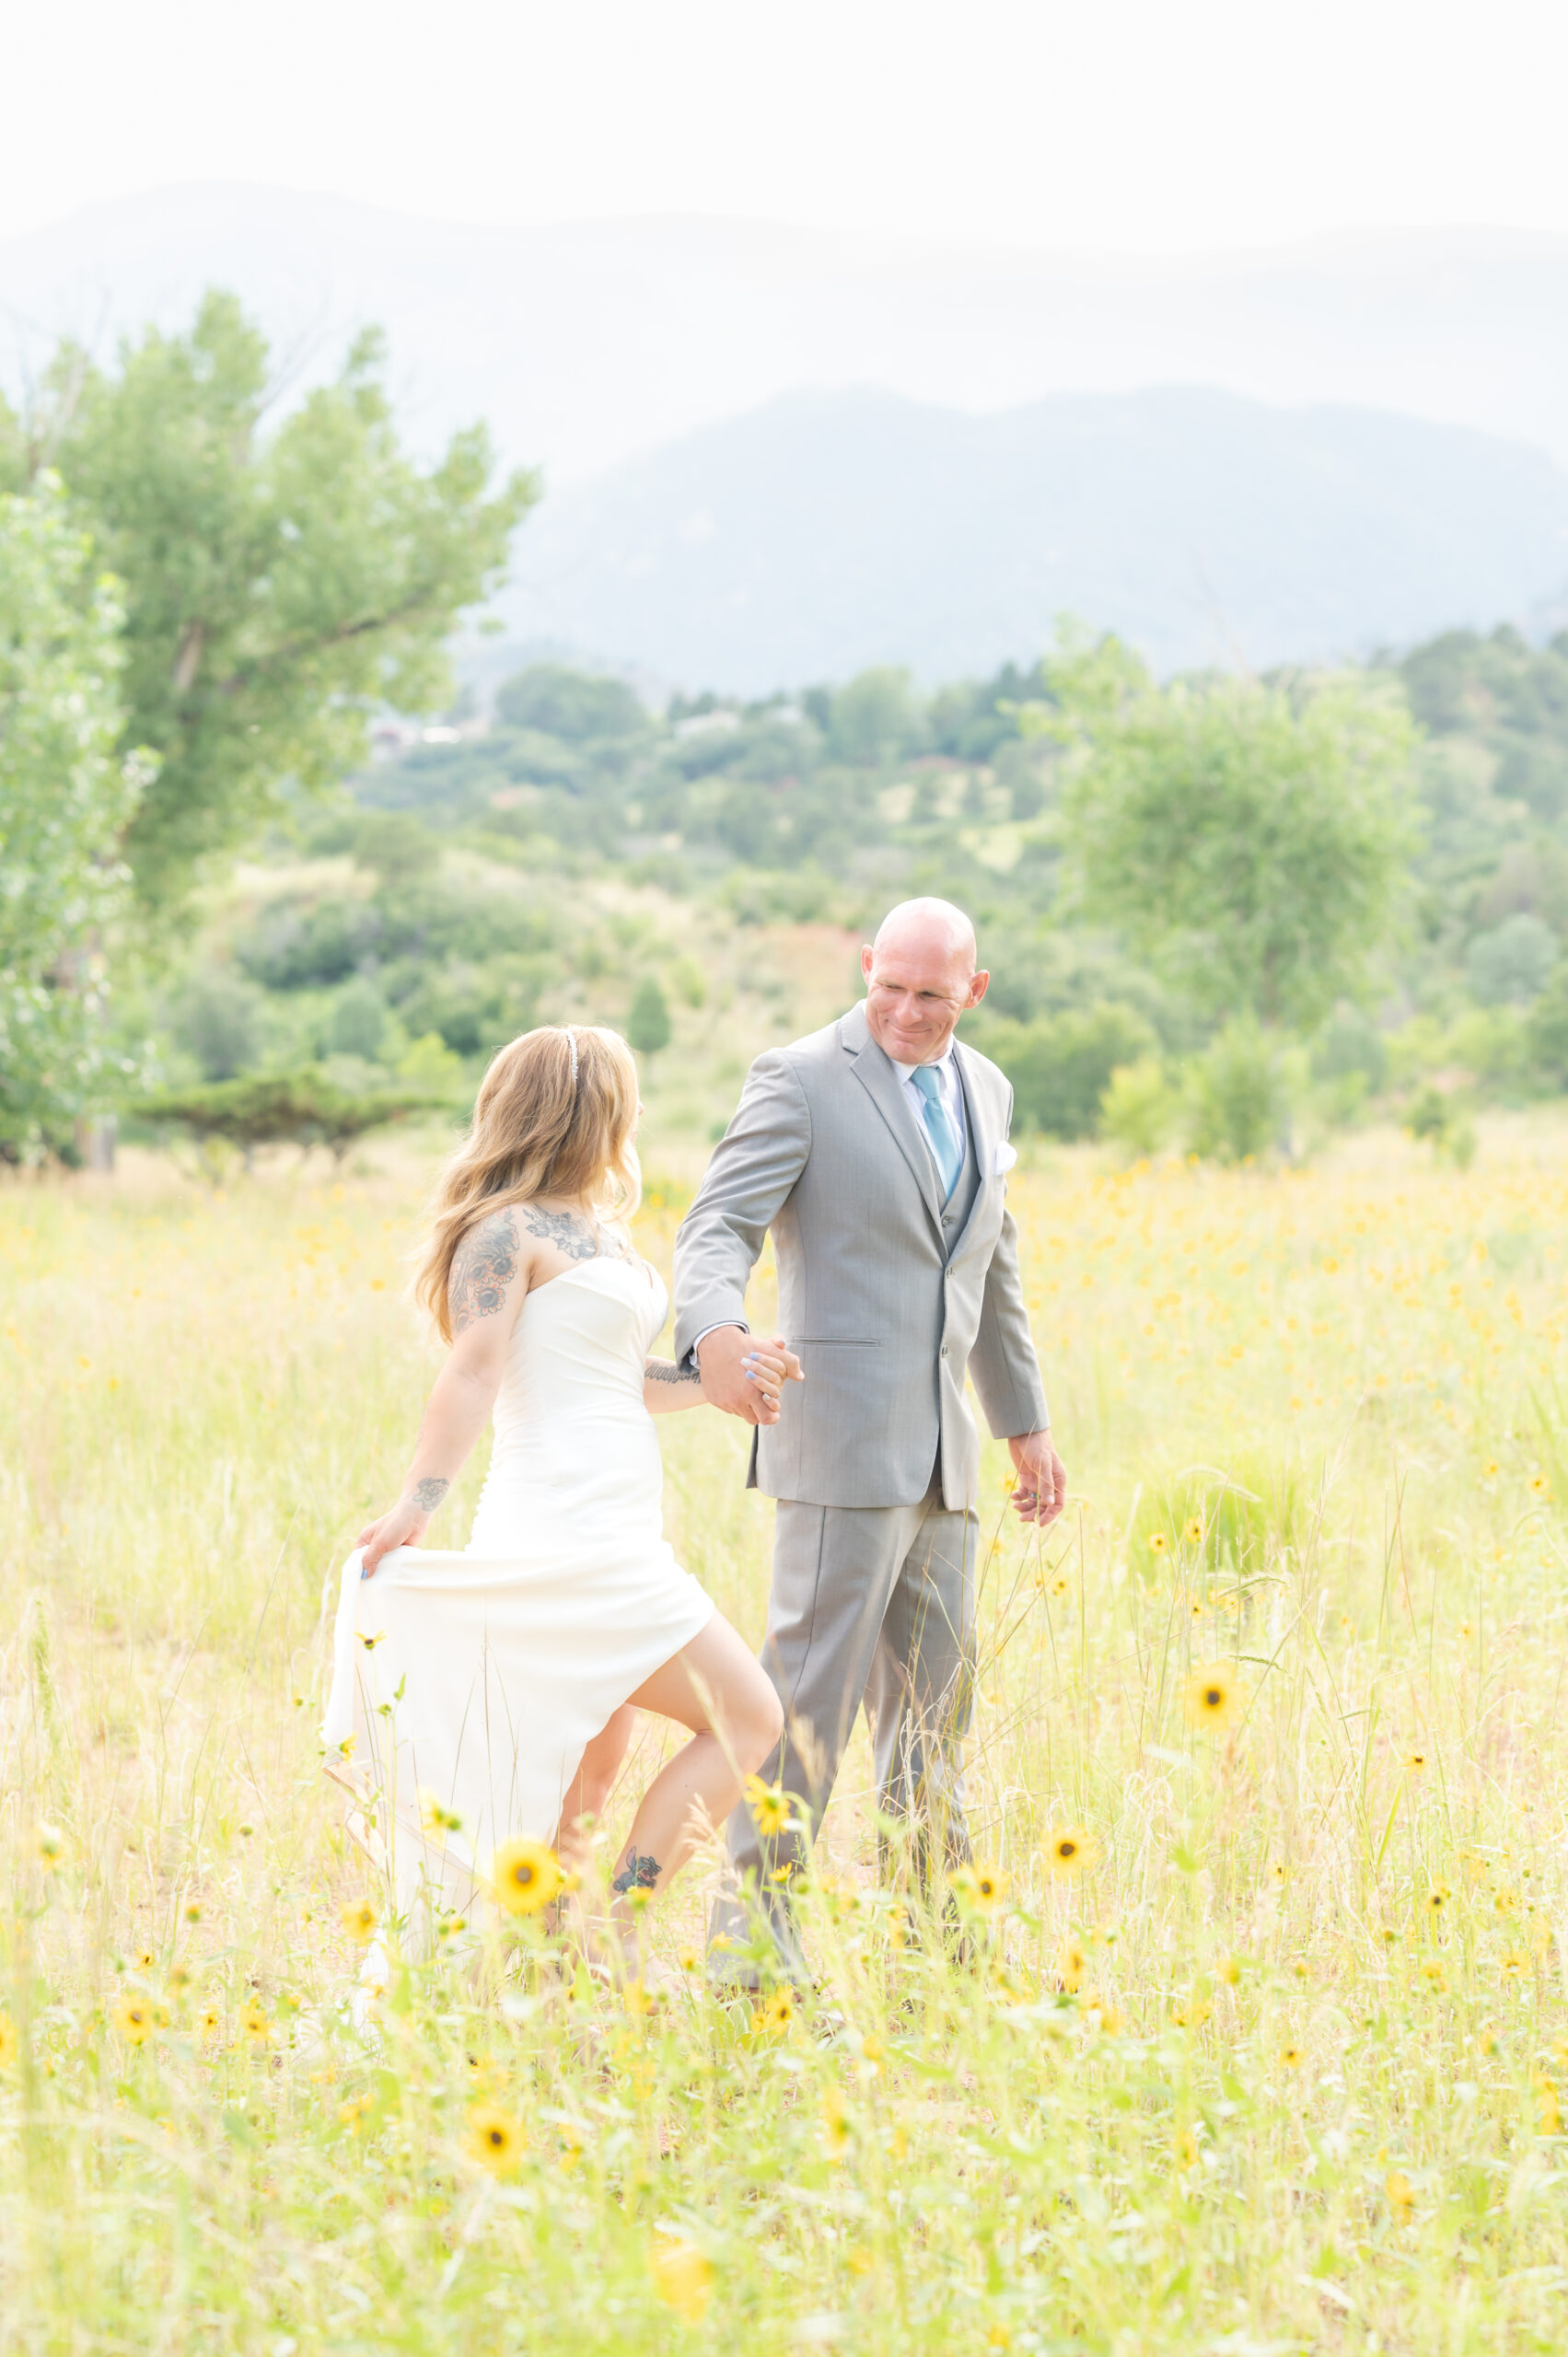 Couple in formal attire holding hands as they walk through a field of sunflowers in Colorado Springs